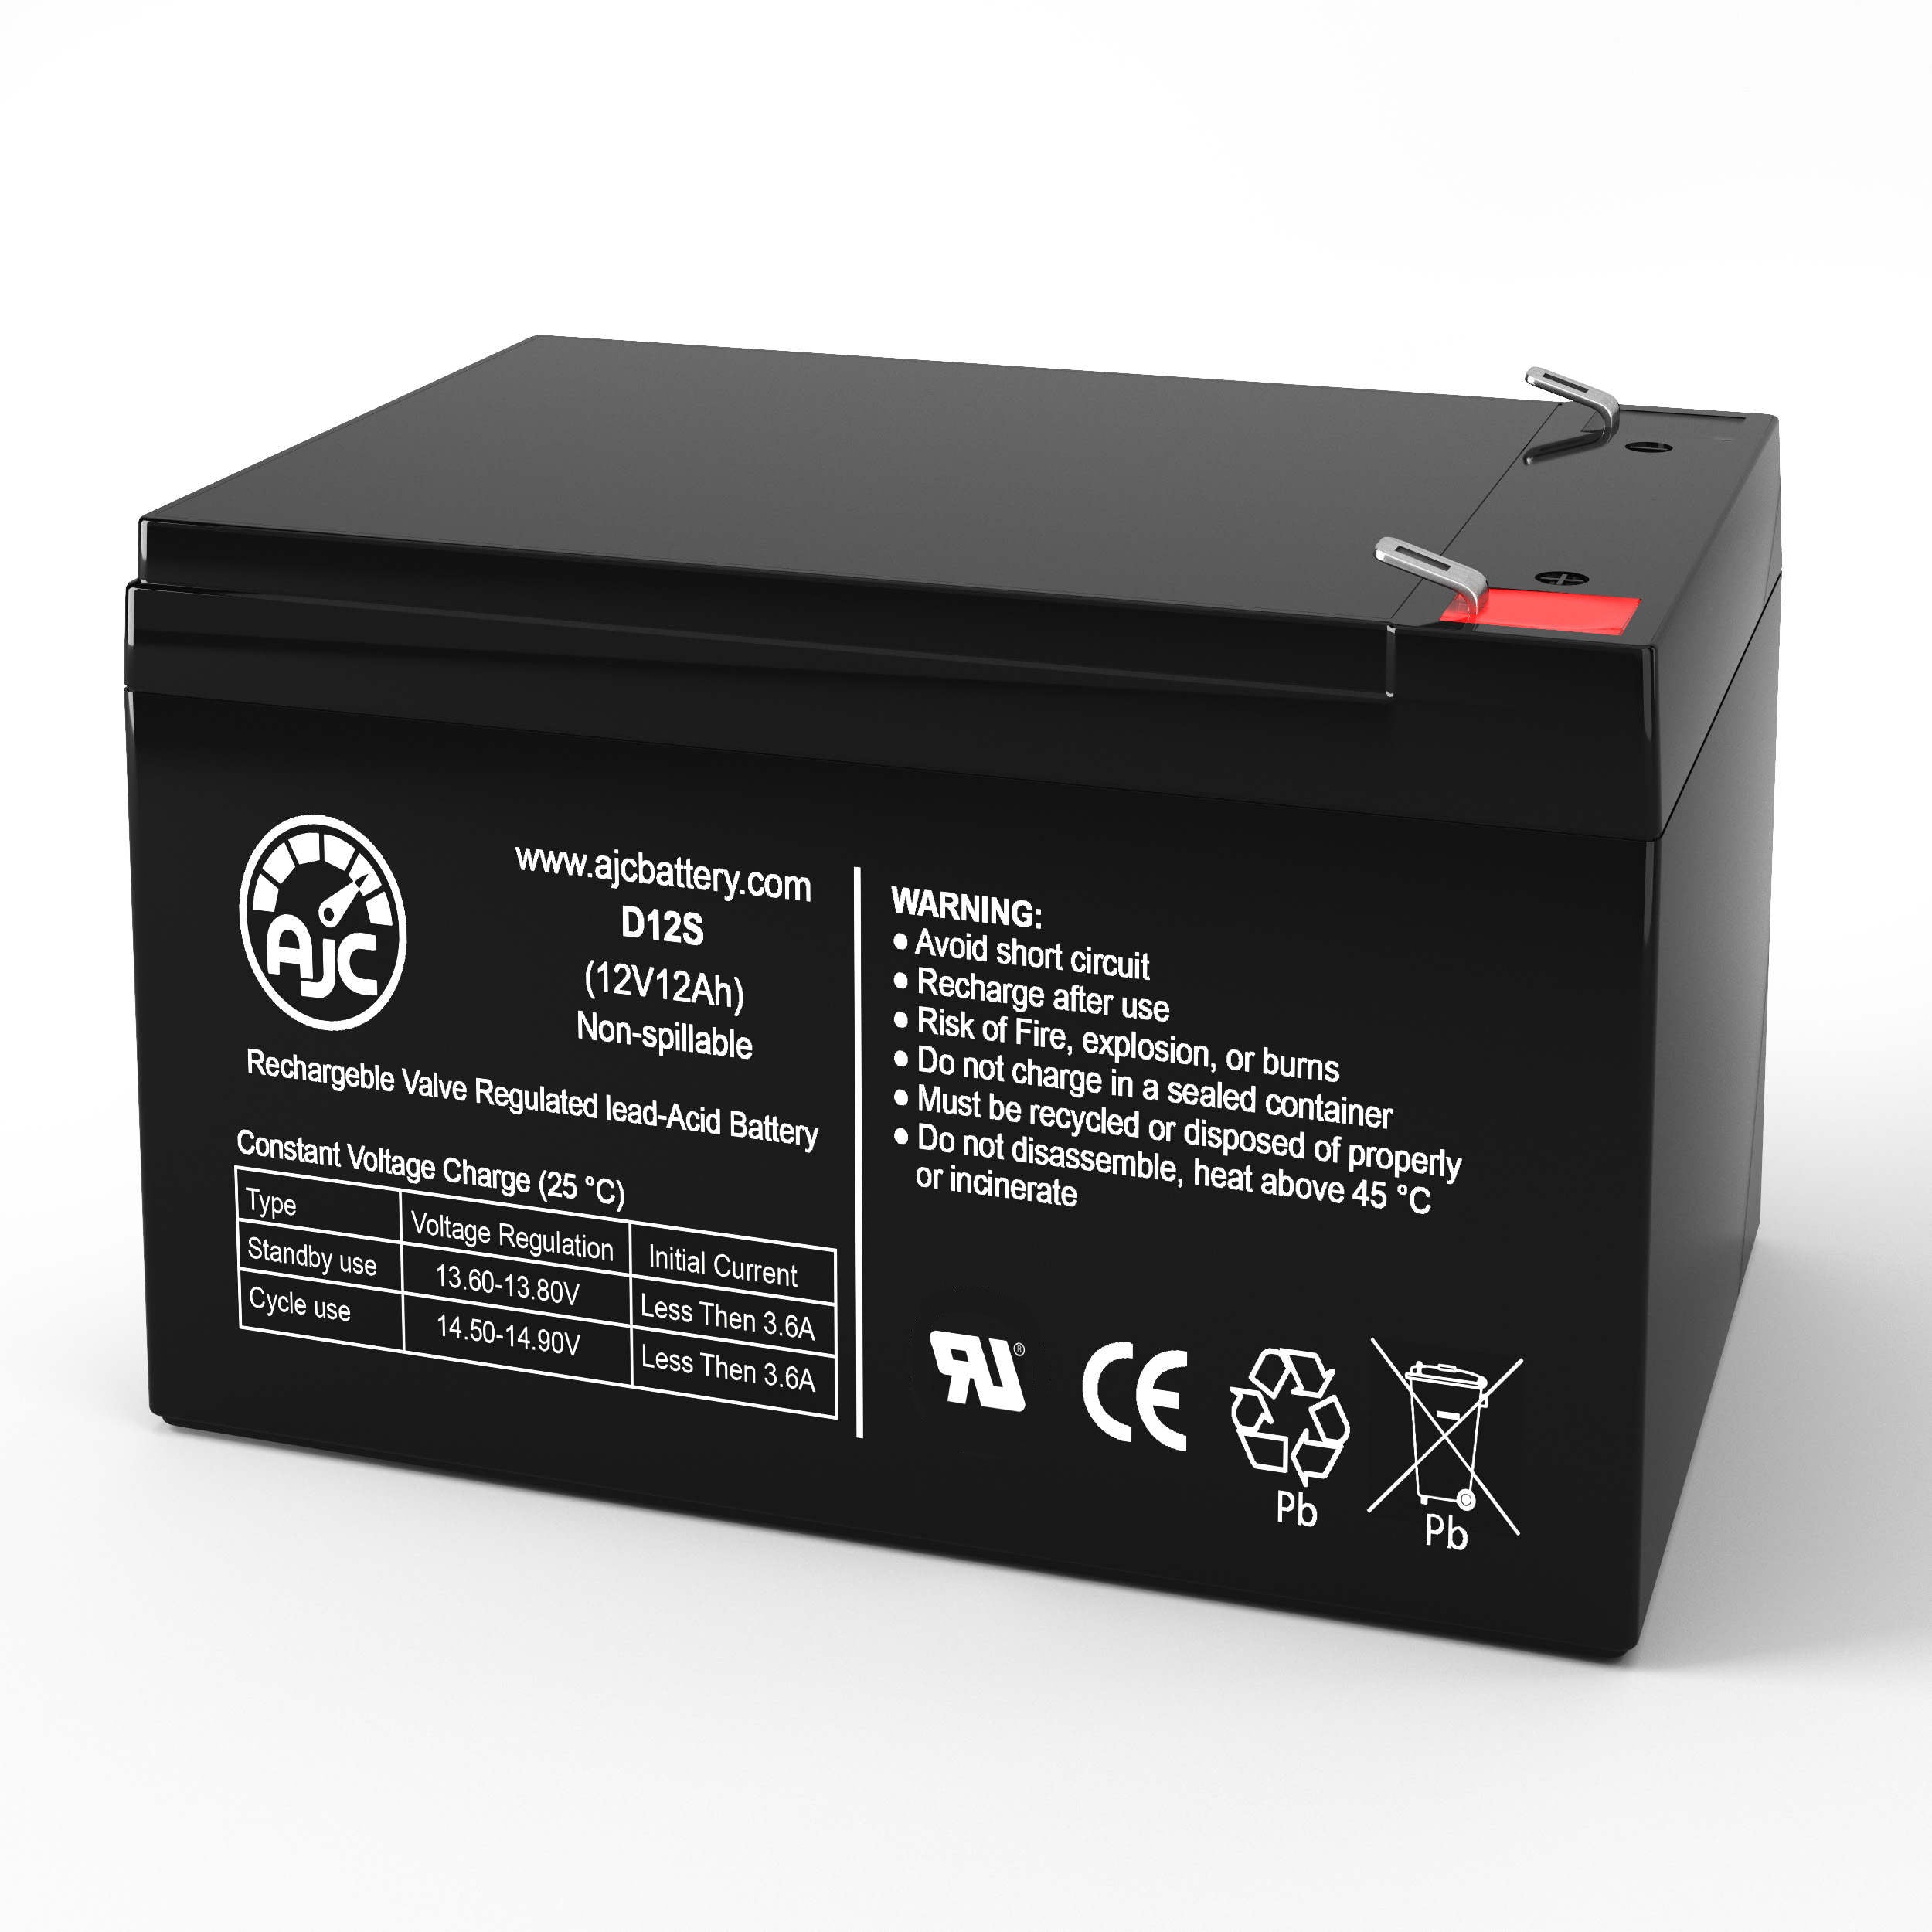 Enduring 6FM12 T2 12V 12Ah UPS Battery - This Is an AJC Brand Replacement - image 1 of 6